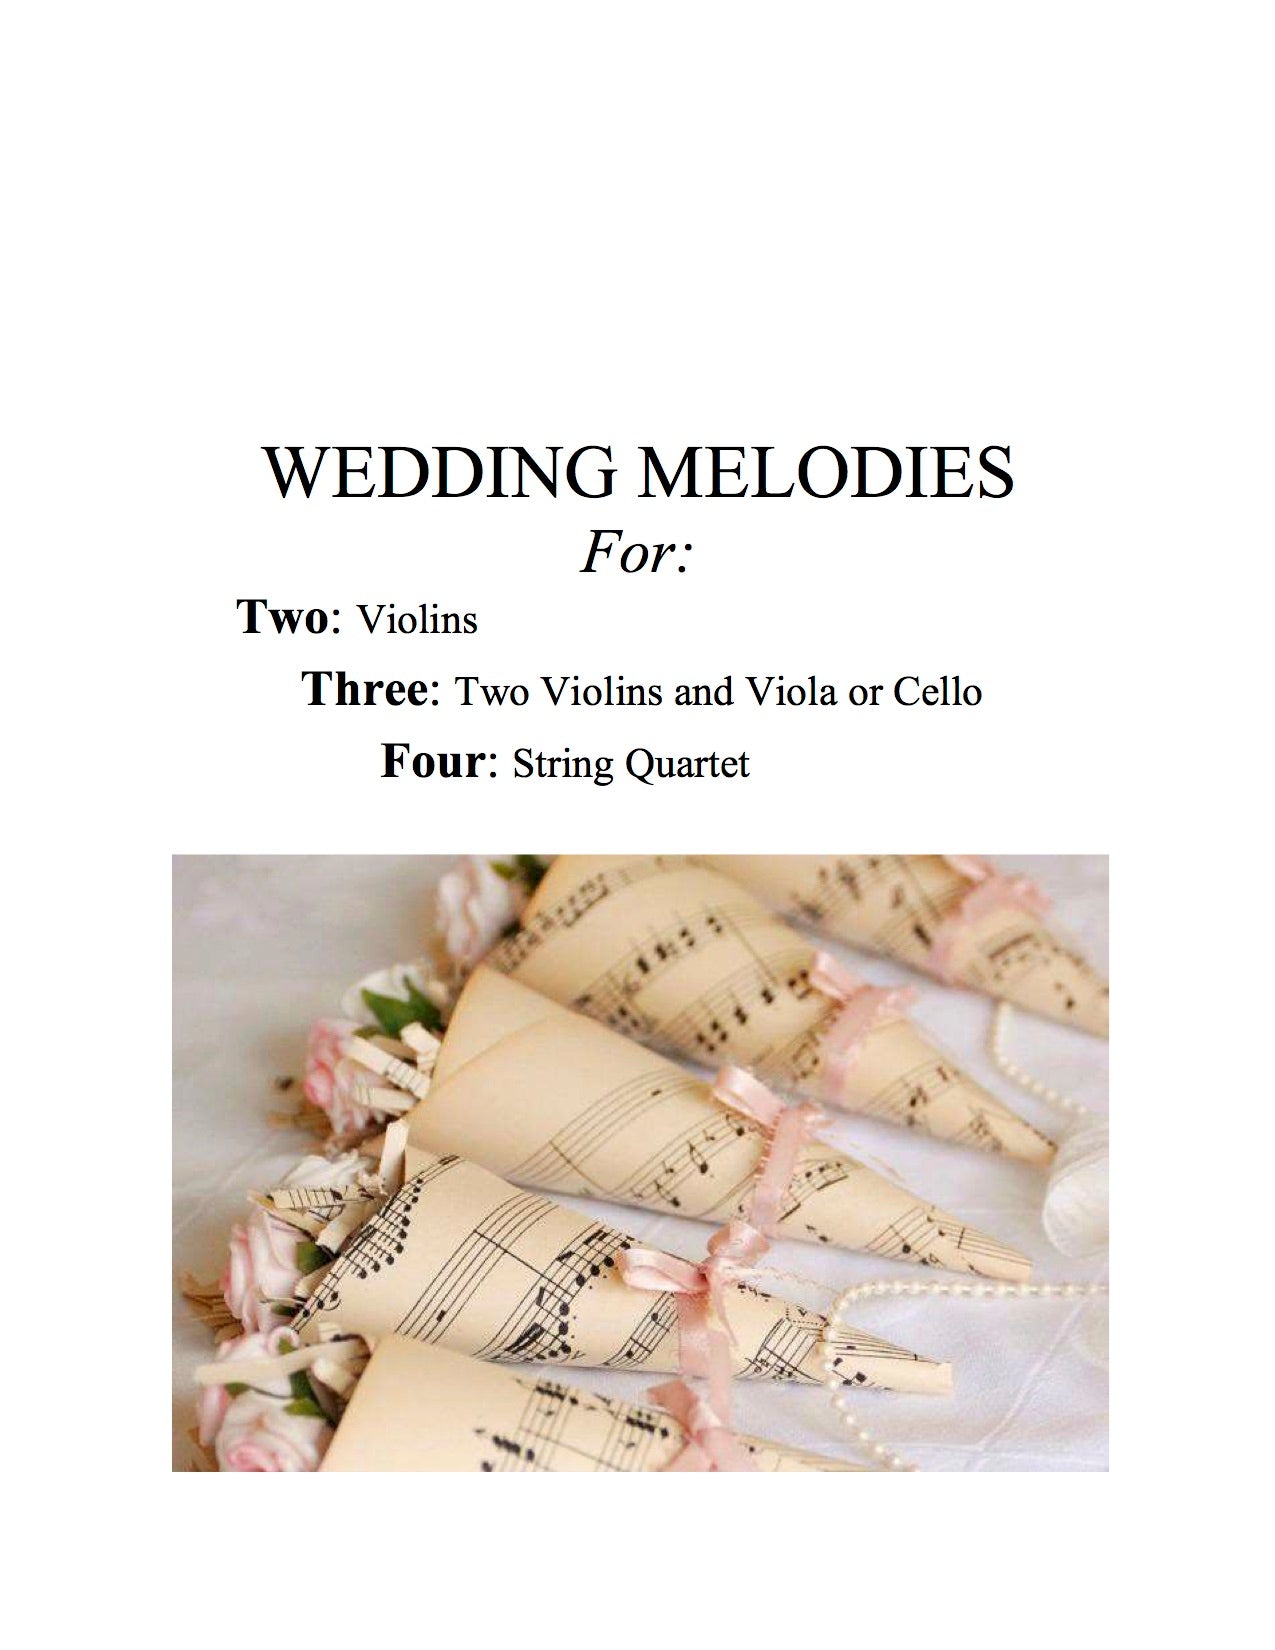 055 - Wedding Melodies For Two, Three or Four (Second Edition)